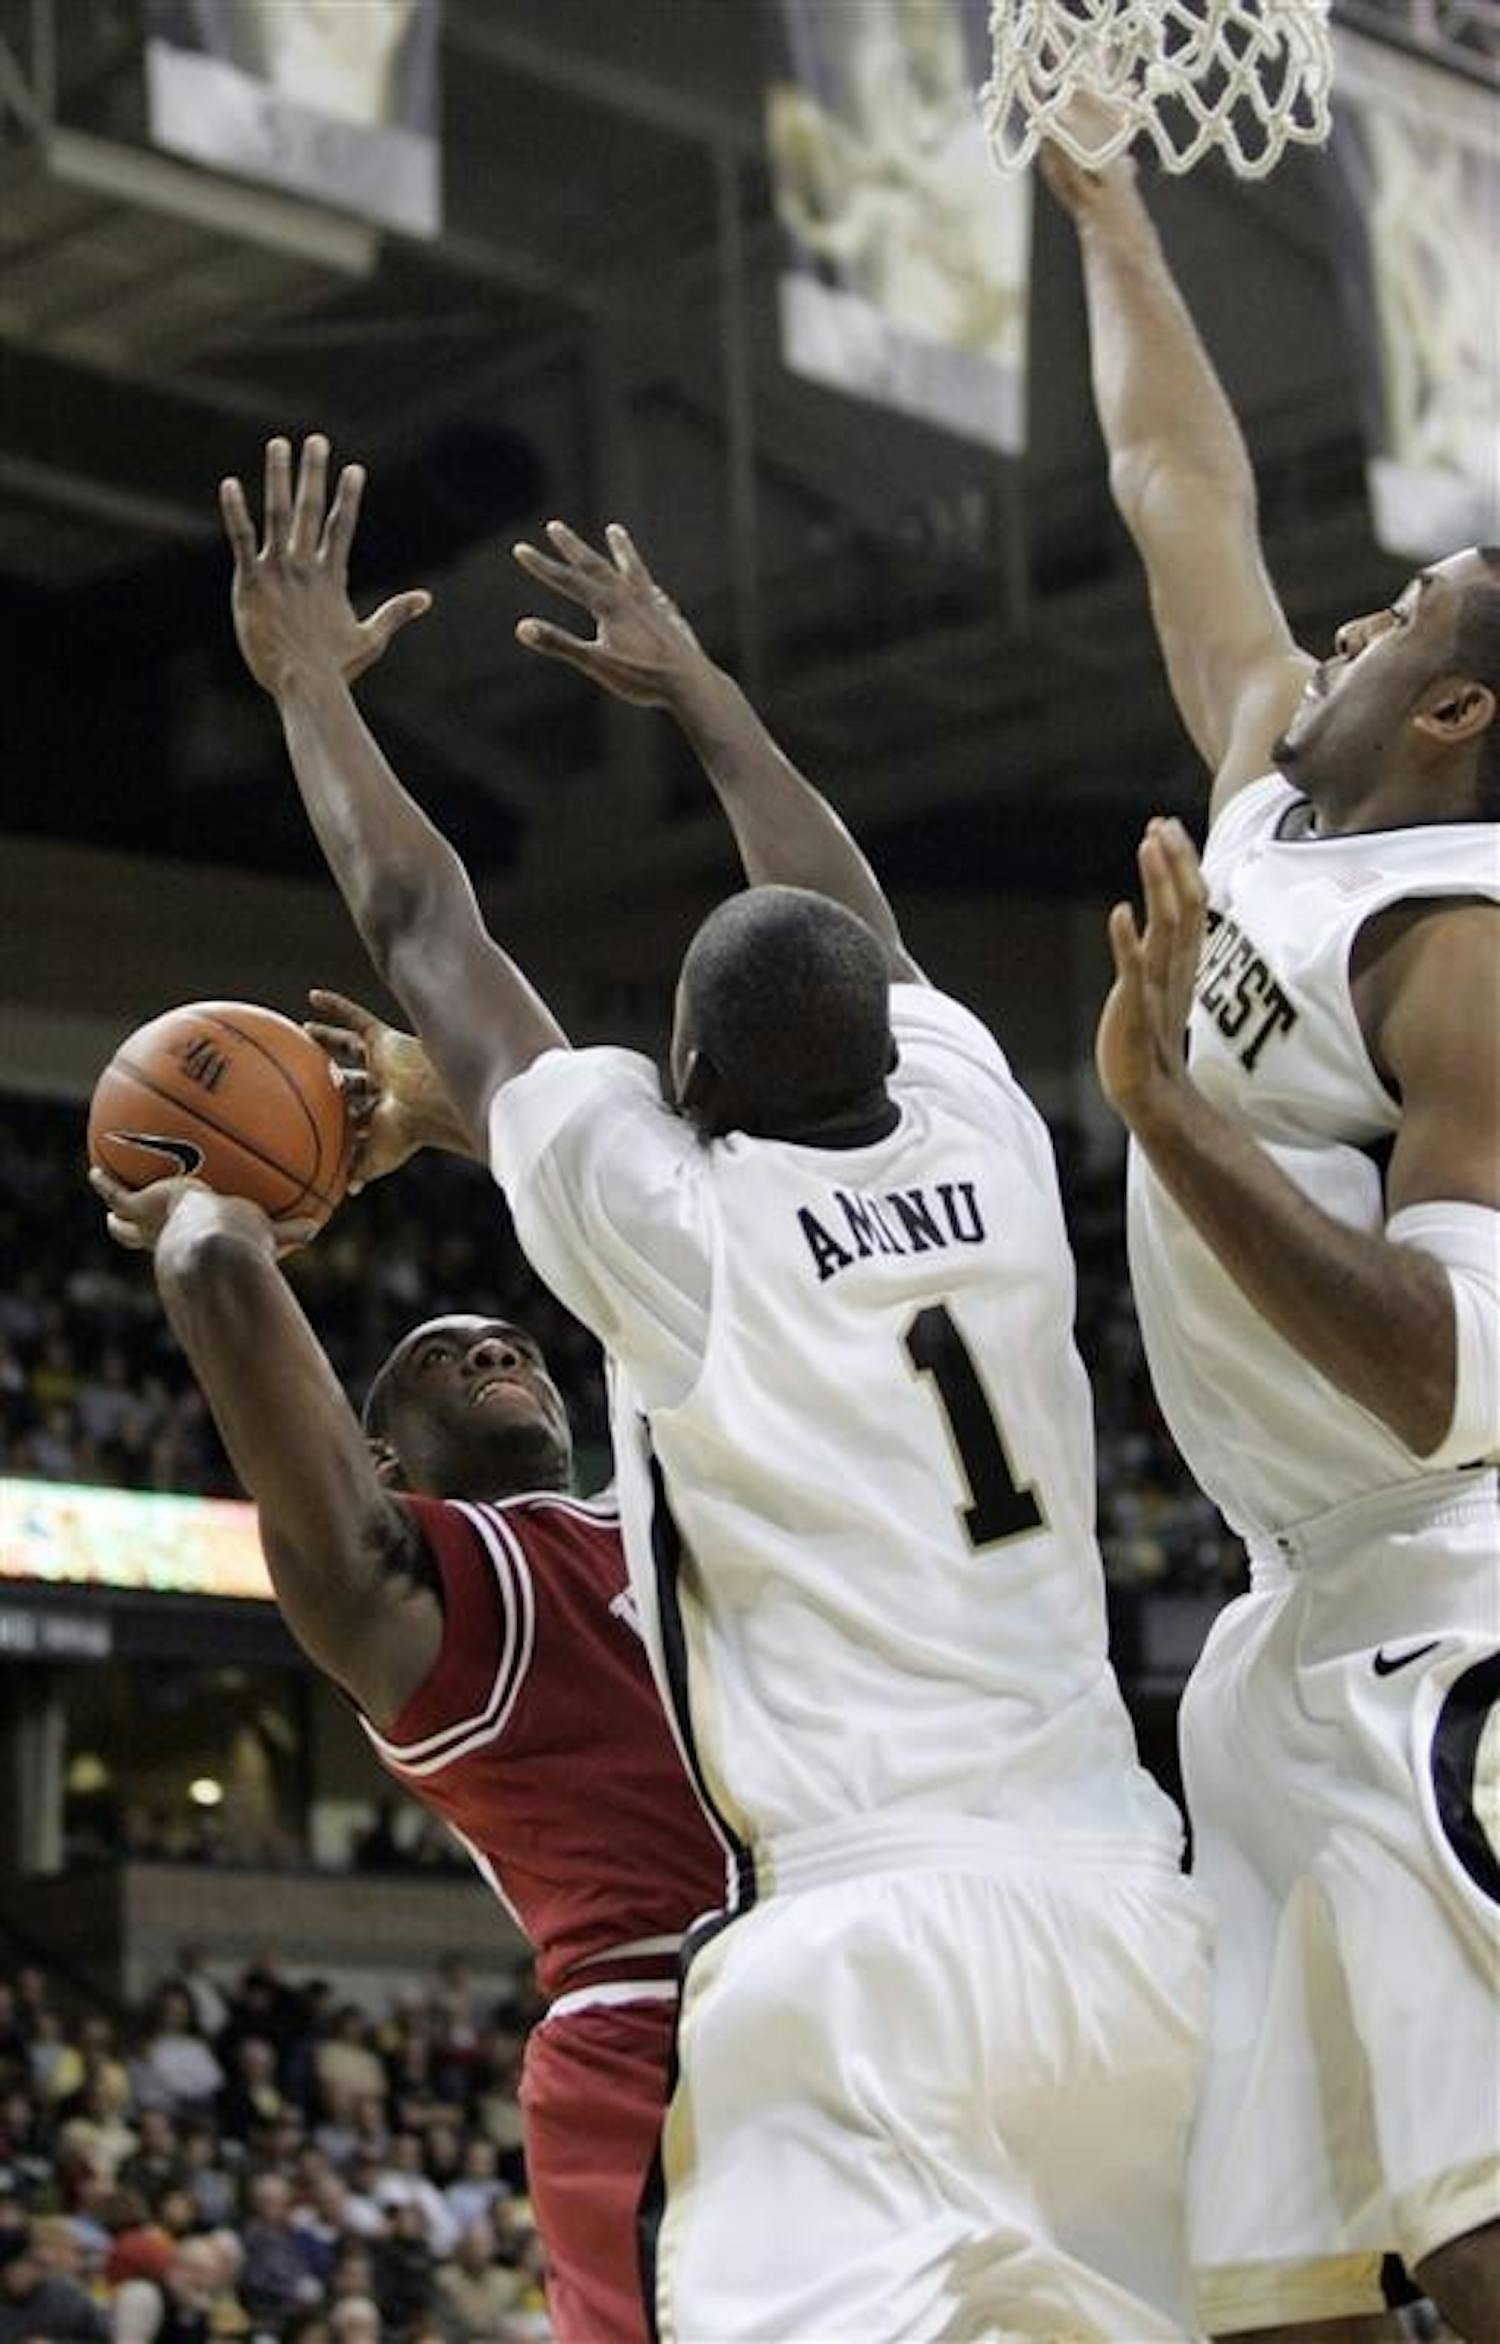 Wake Forest defenders swarm IU's Malik Story as he attempts a shot during IU's 83-58 loss Wednesday night in Winston-Salem, N.C. Wake Forest's defense forced 26 turnovers.